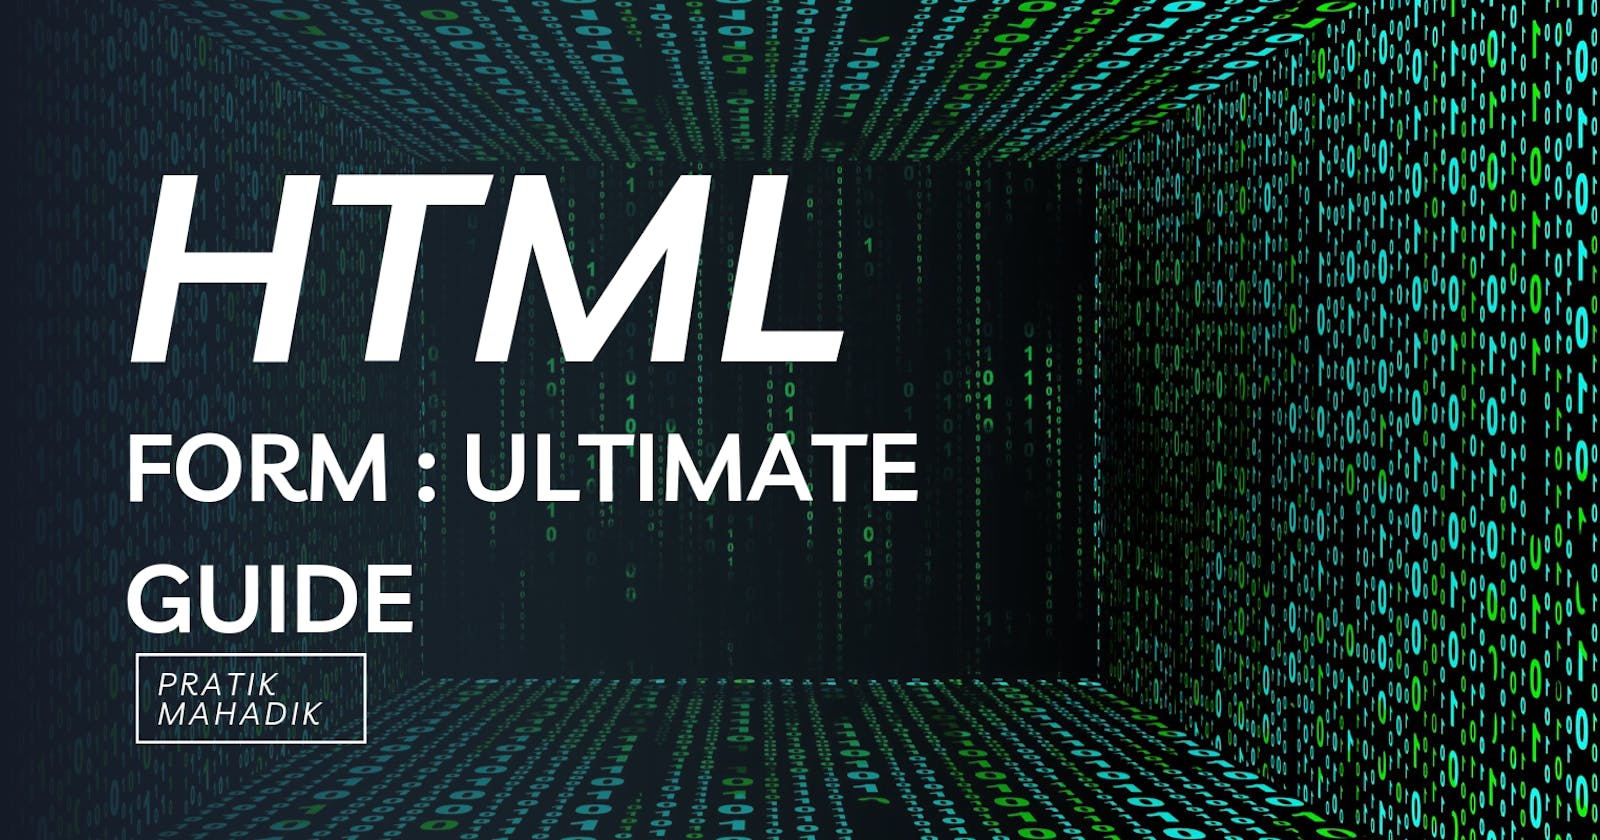 How to Use HTML Form Effectively in Just 2 min !!